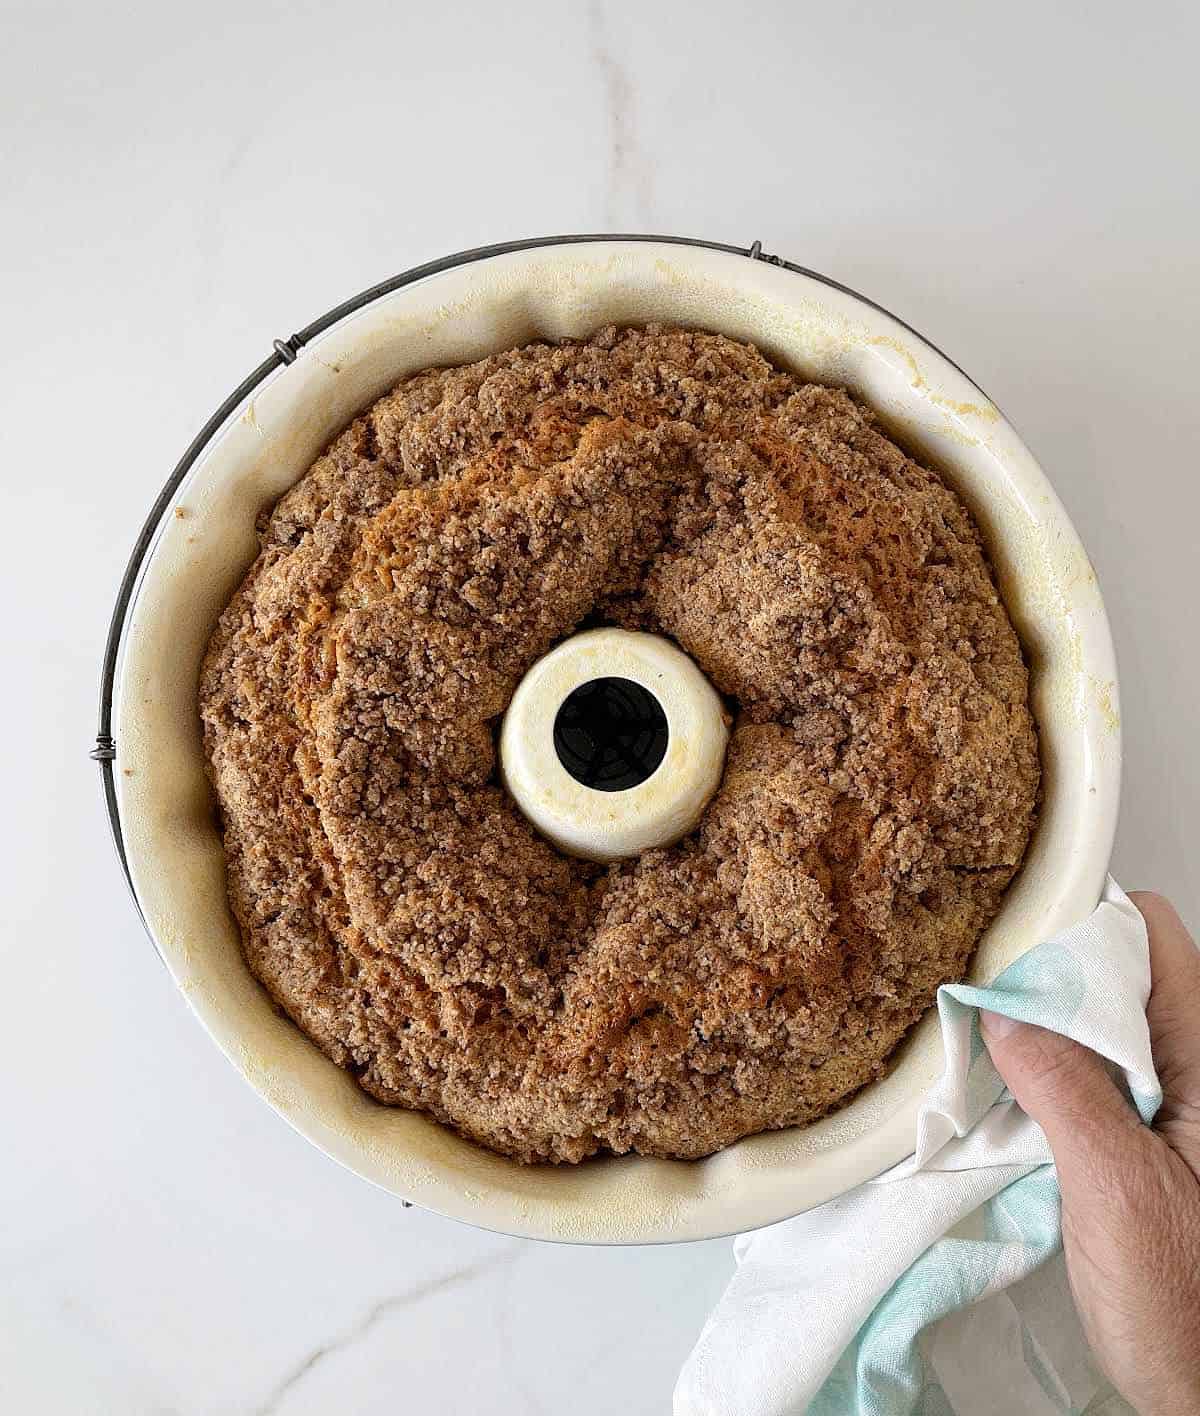 Baked bundt cake in white pan on white surface, hand holding kitchen towel.